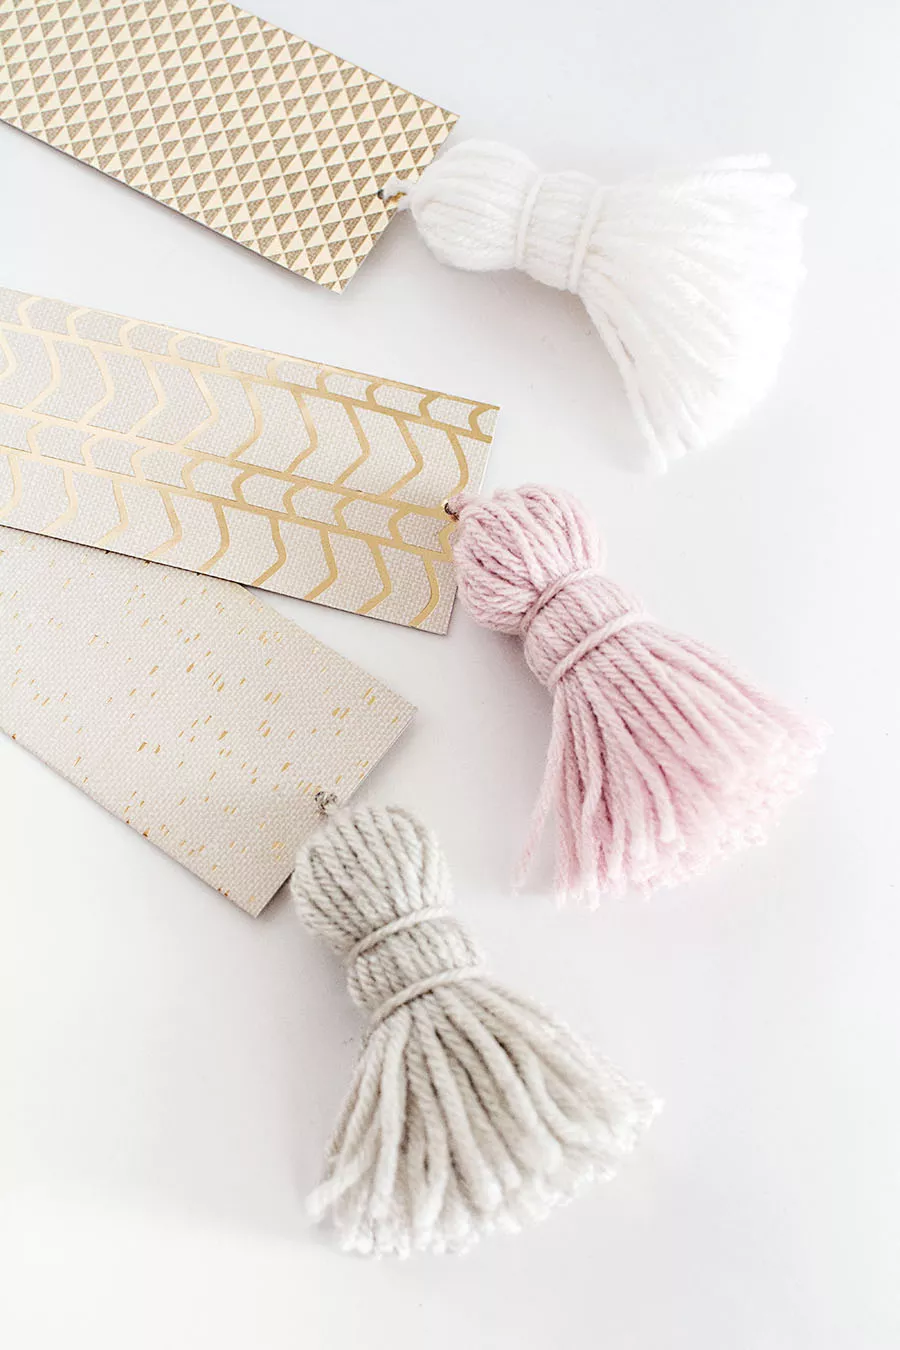  

DIY Chunky Tassel Bookmarks from Homeyohmy